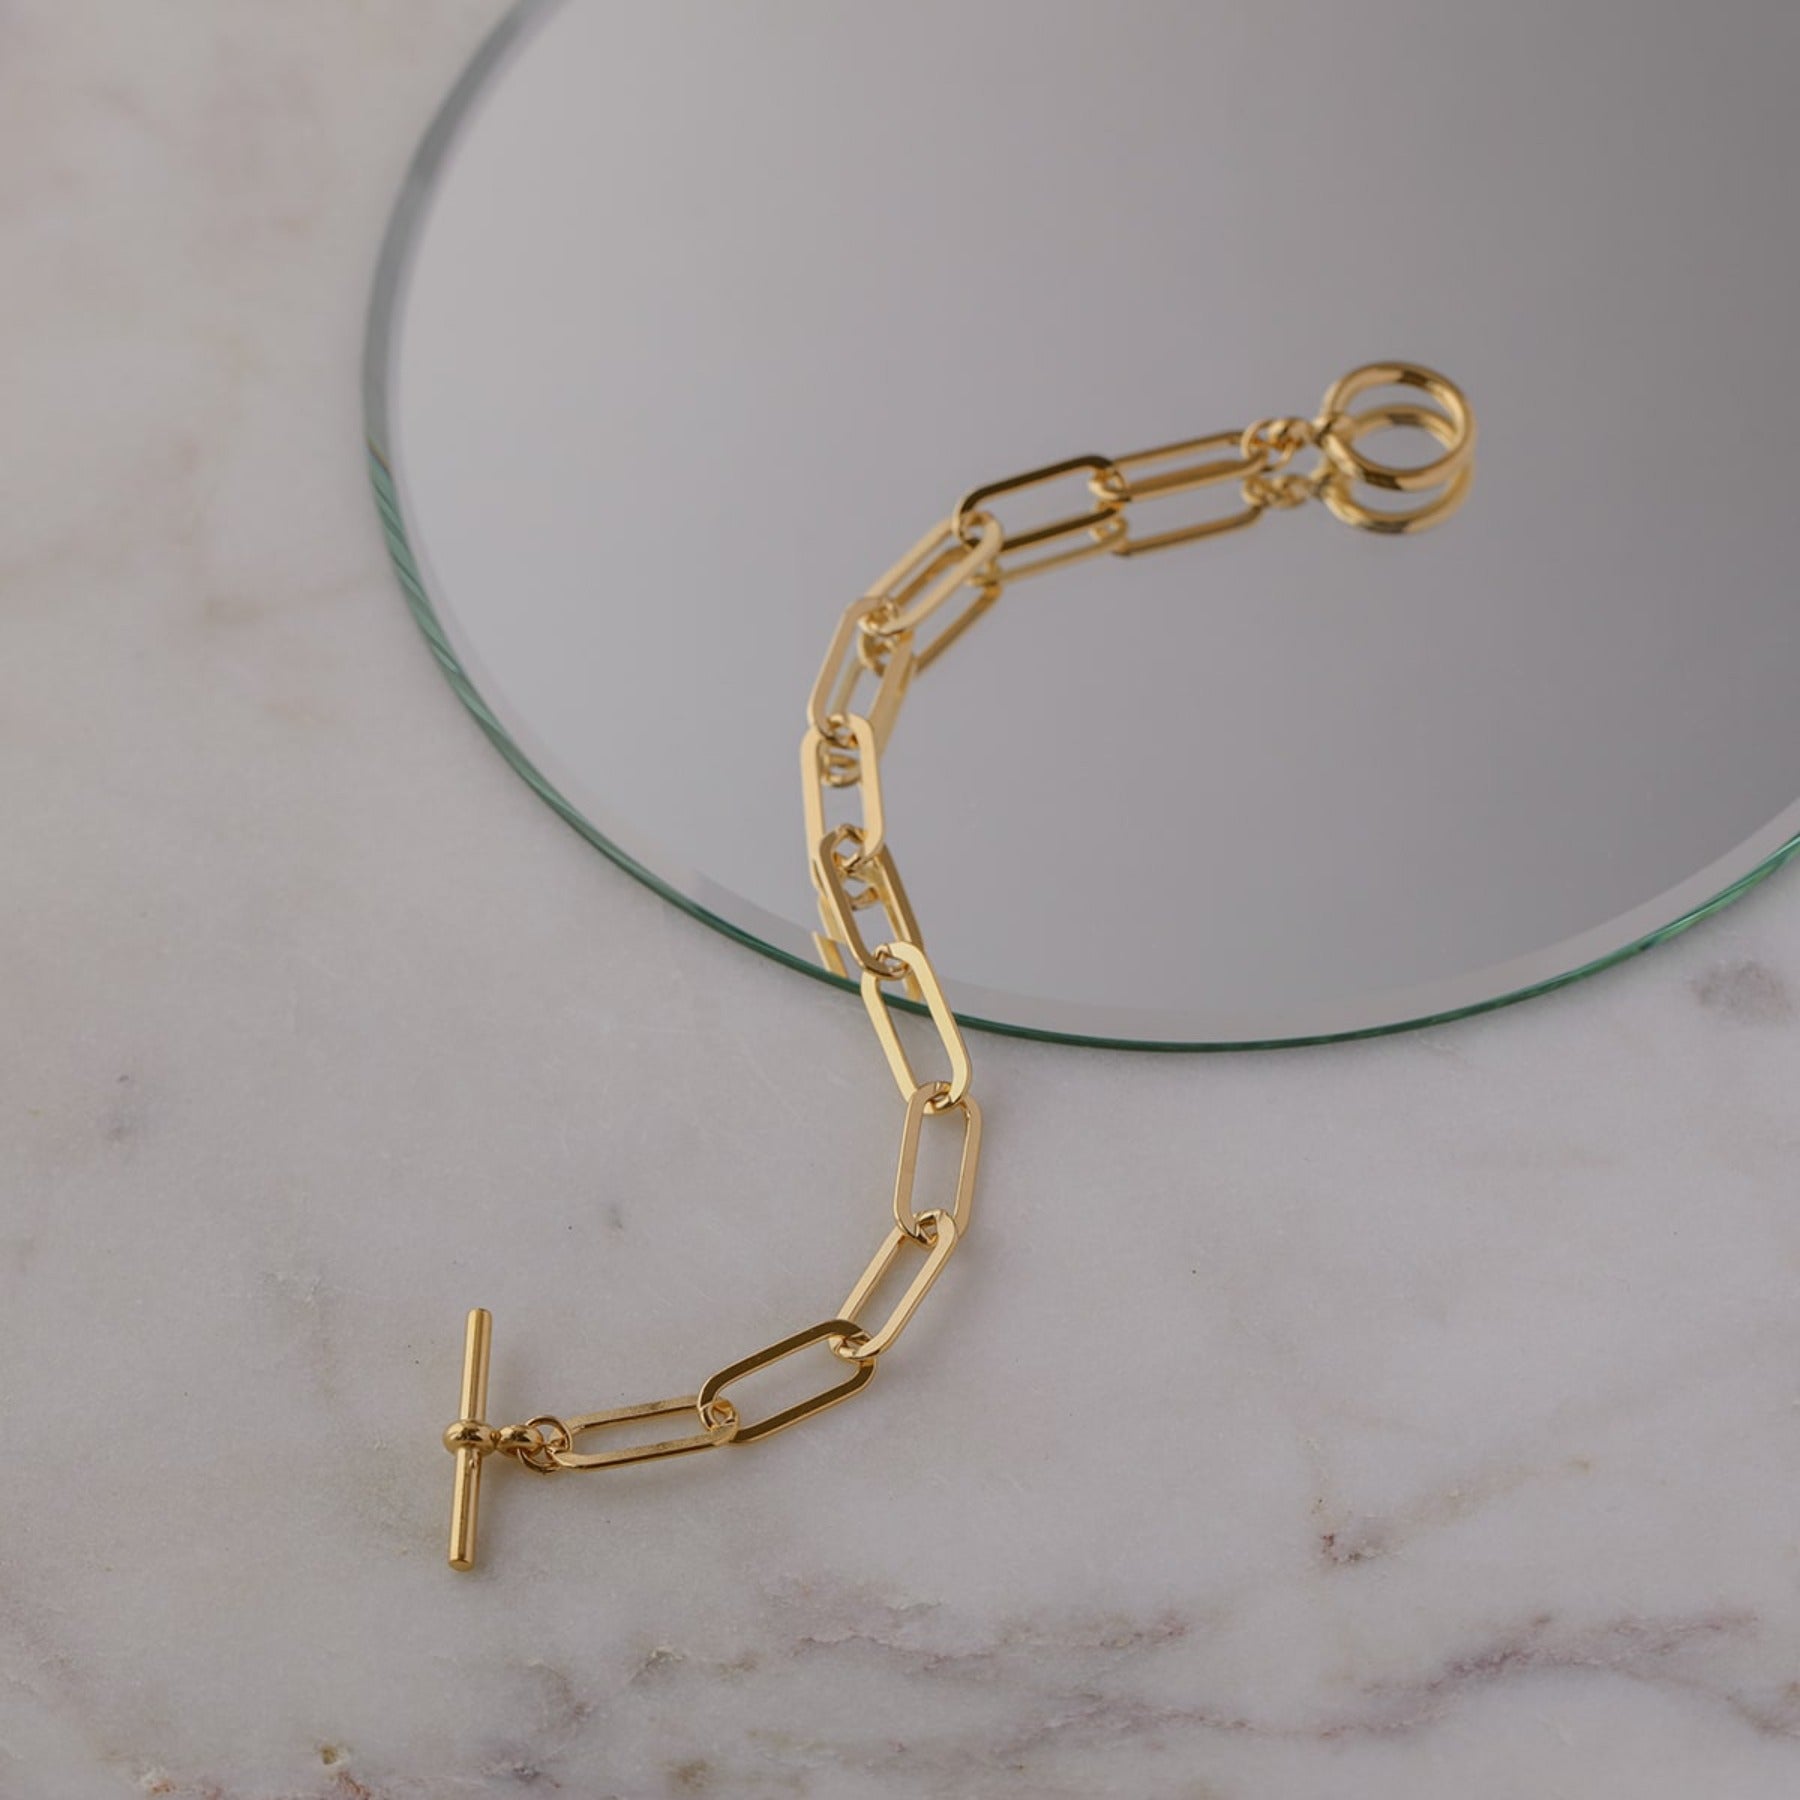 Elongated flattened paperclip chain bracelet with a toggle clasp in 18k gold vermeil.